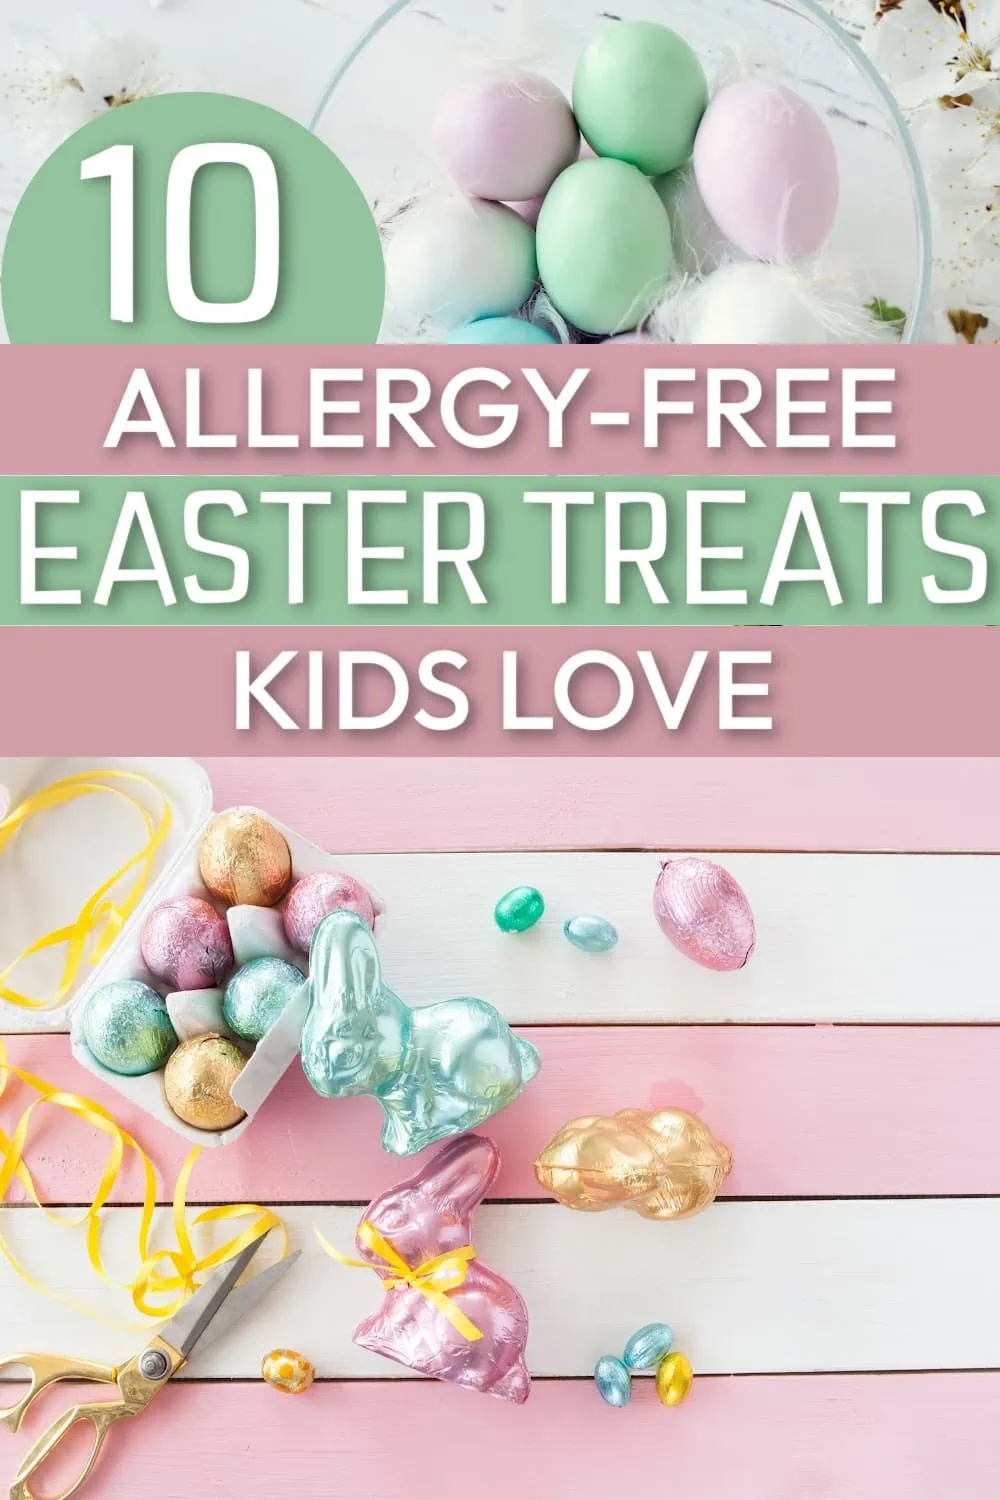 10 allergen-free Easter treats kids love text on an image of Easter candy